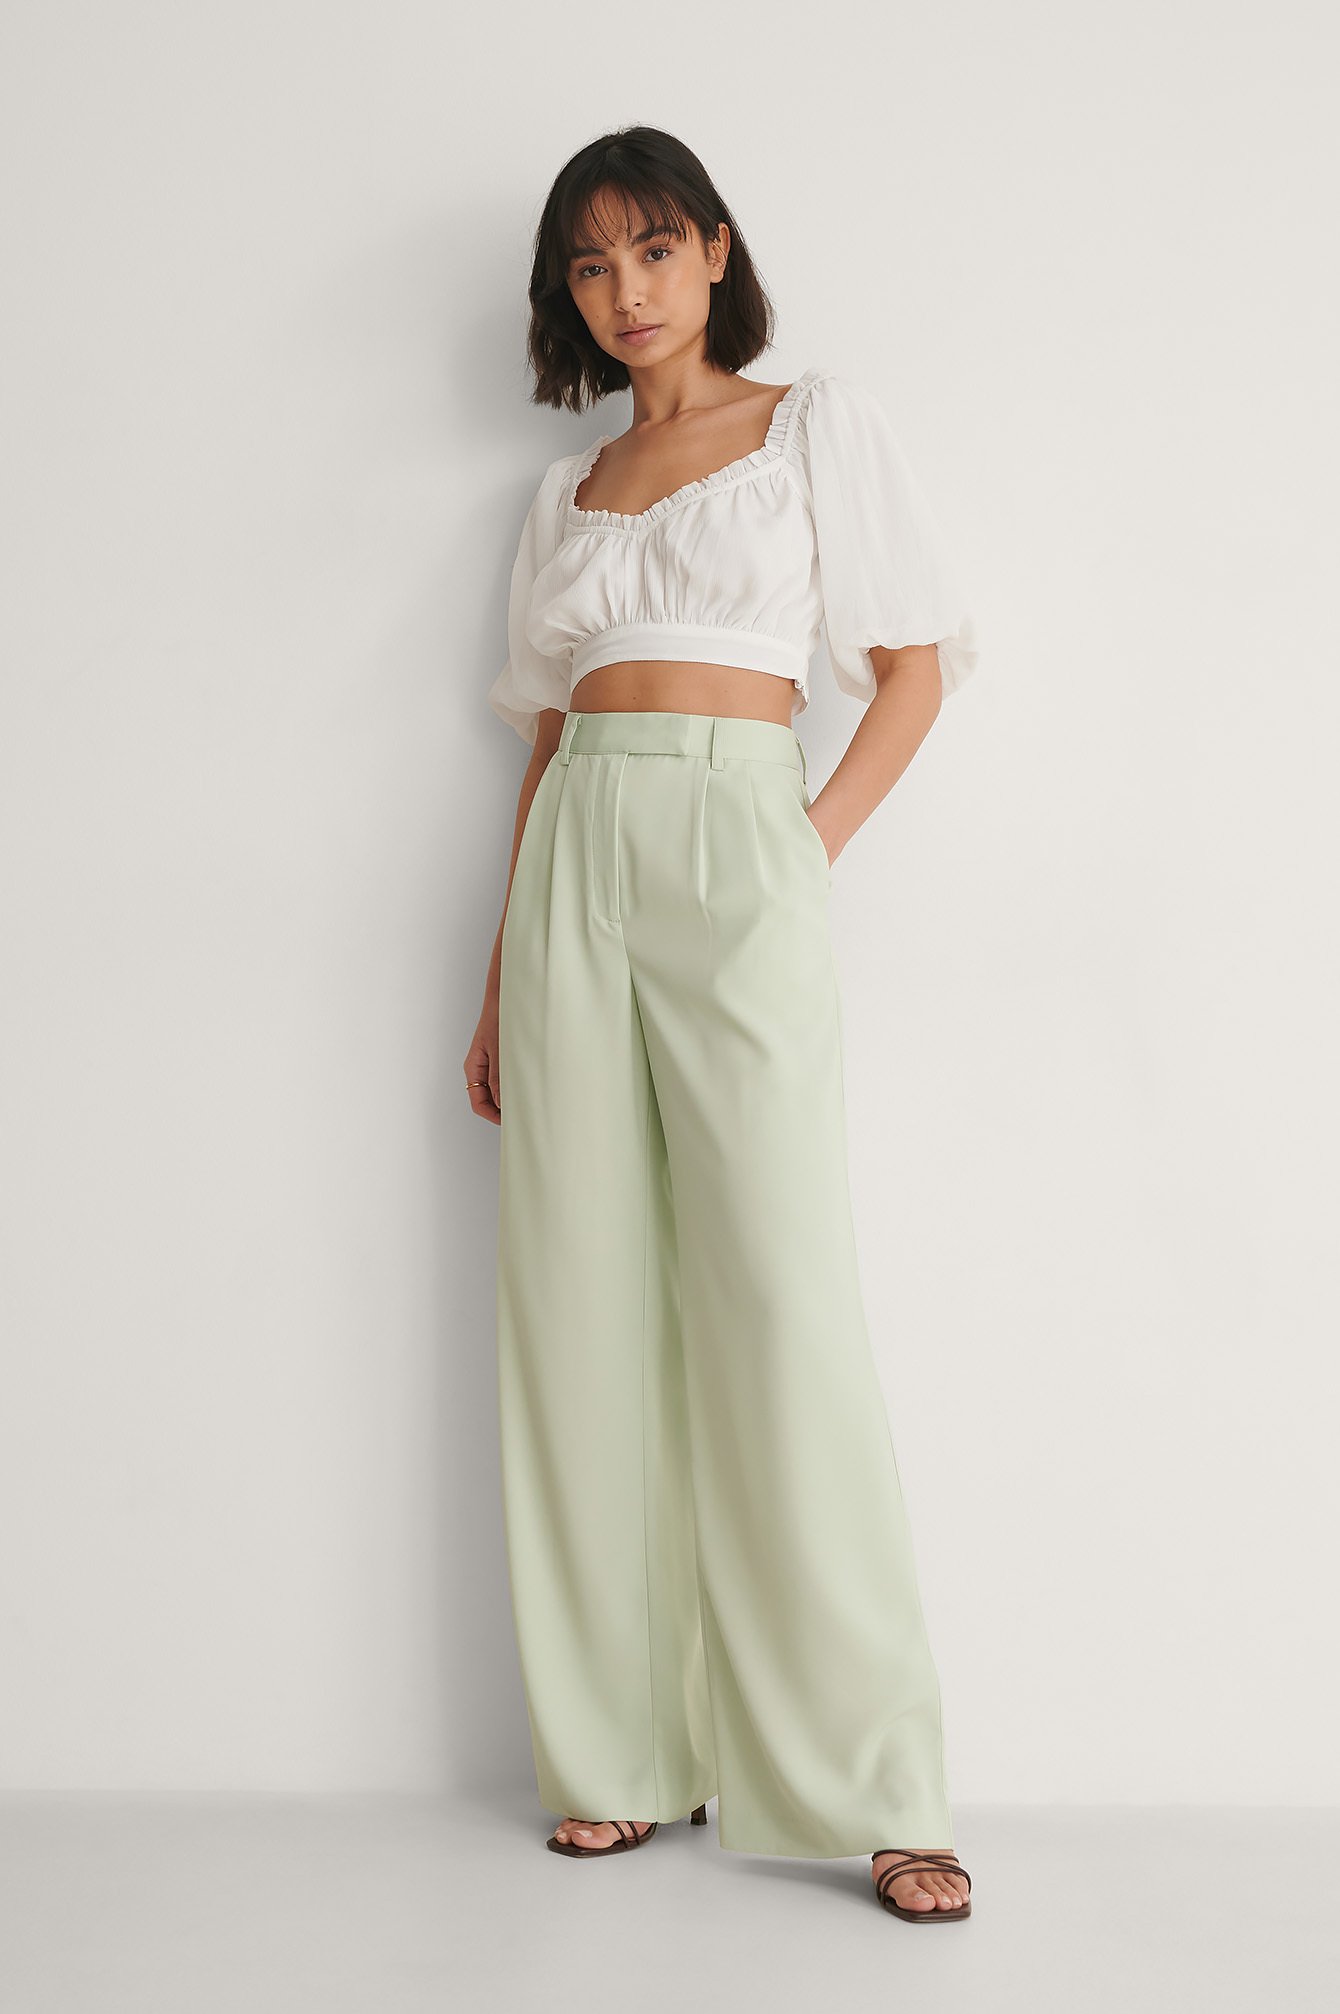 White Frill Detail Cropped Top